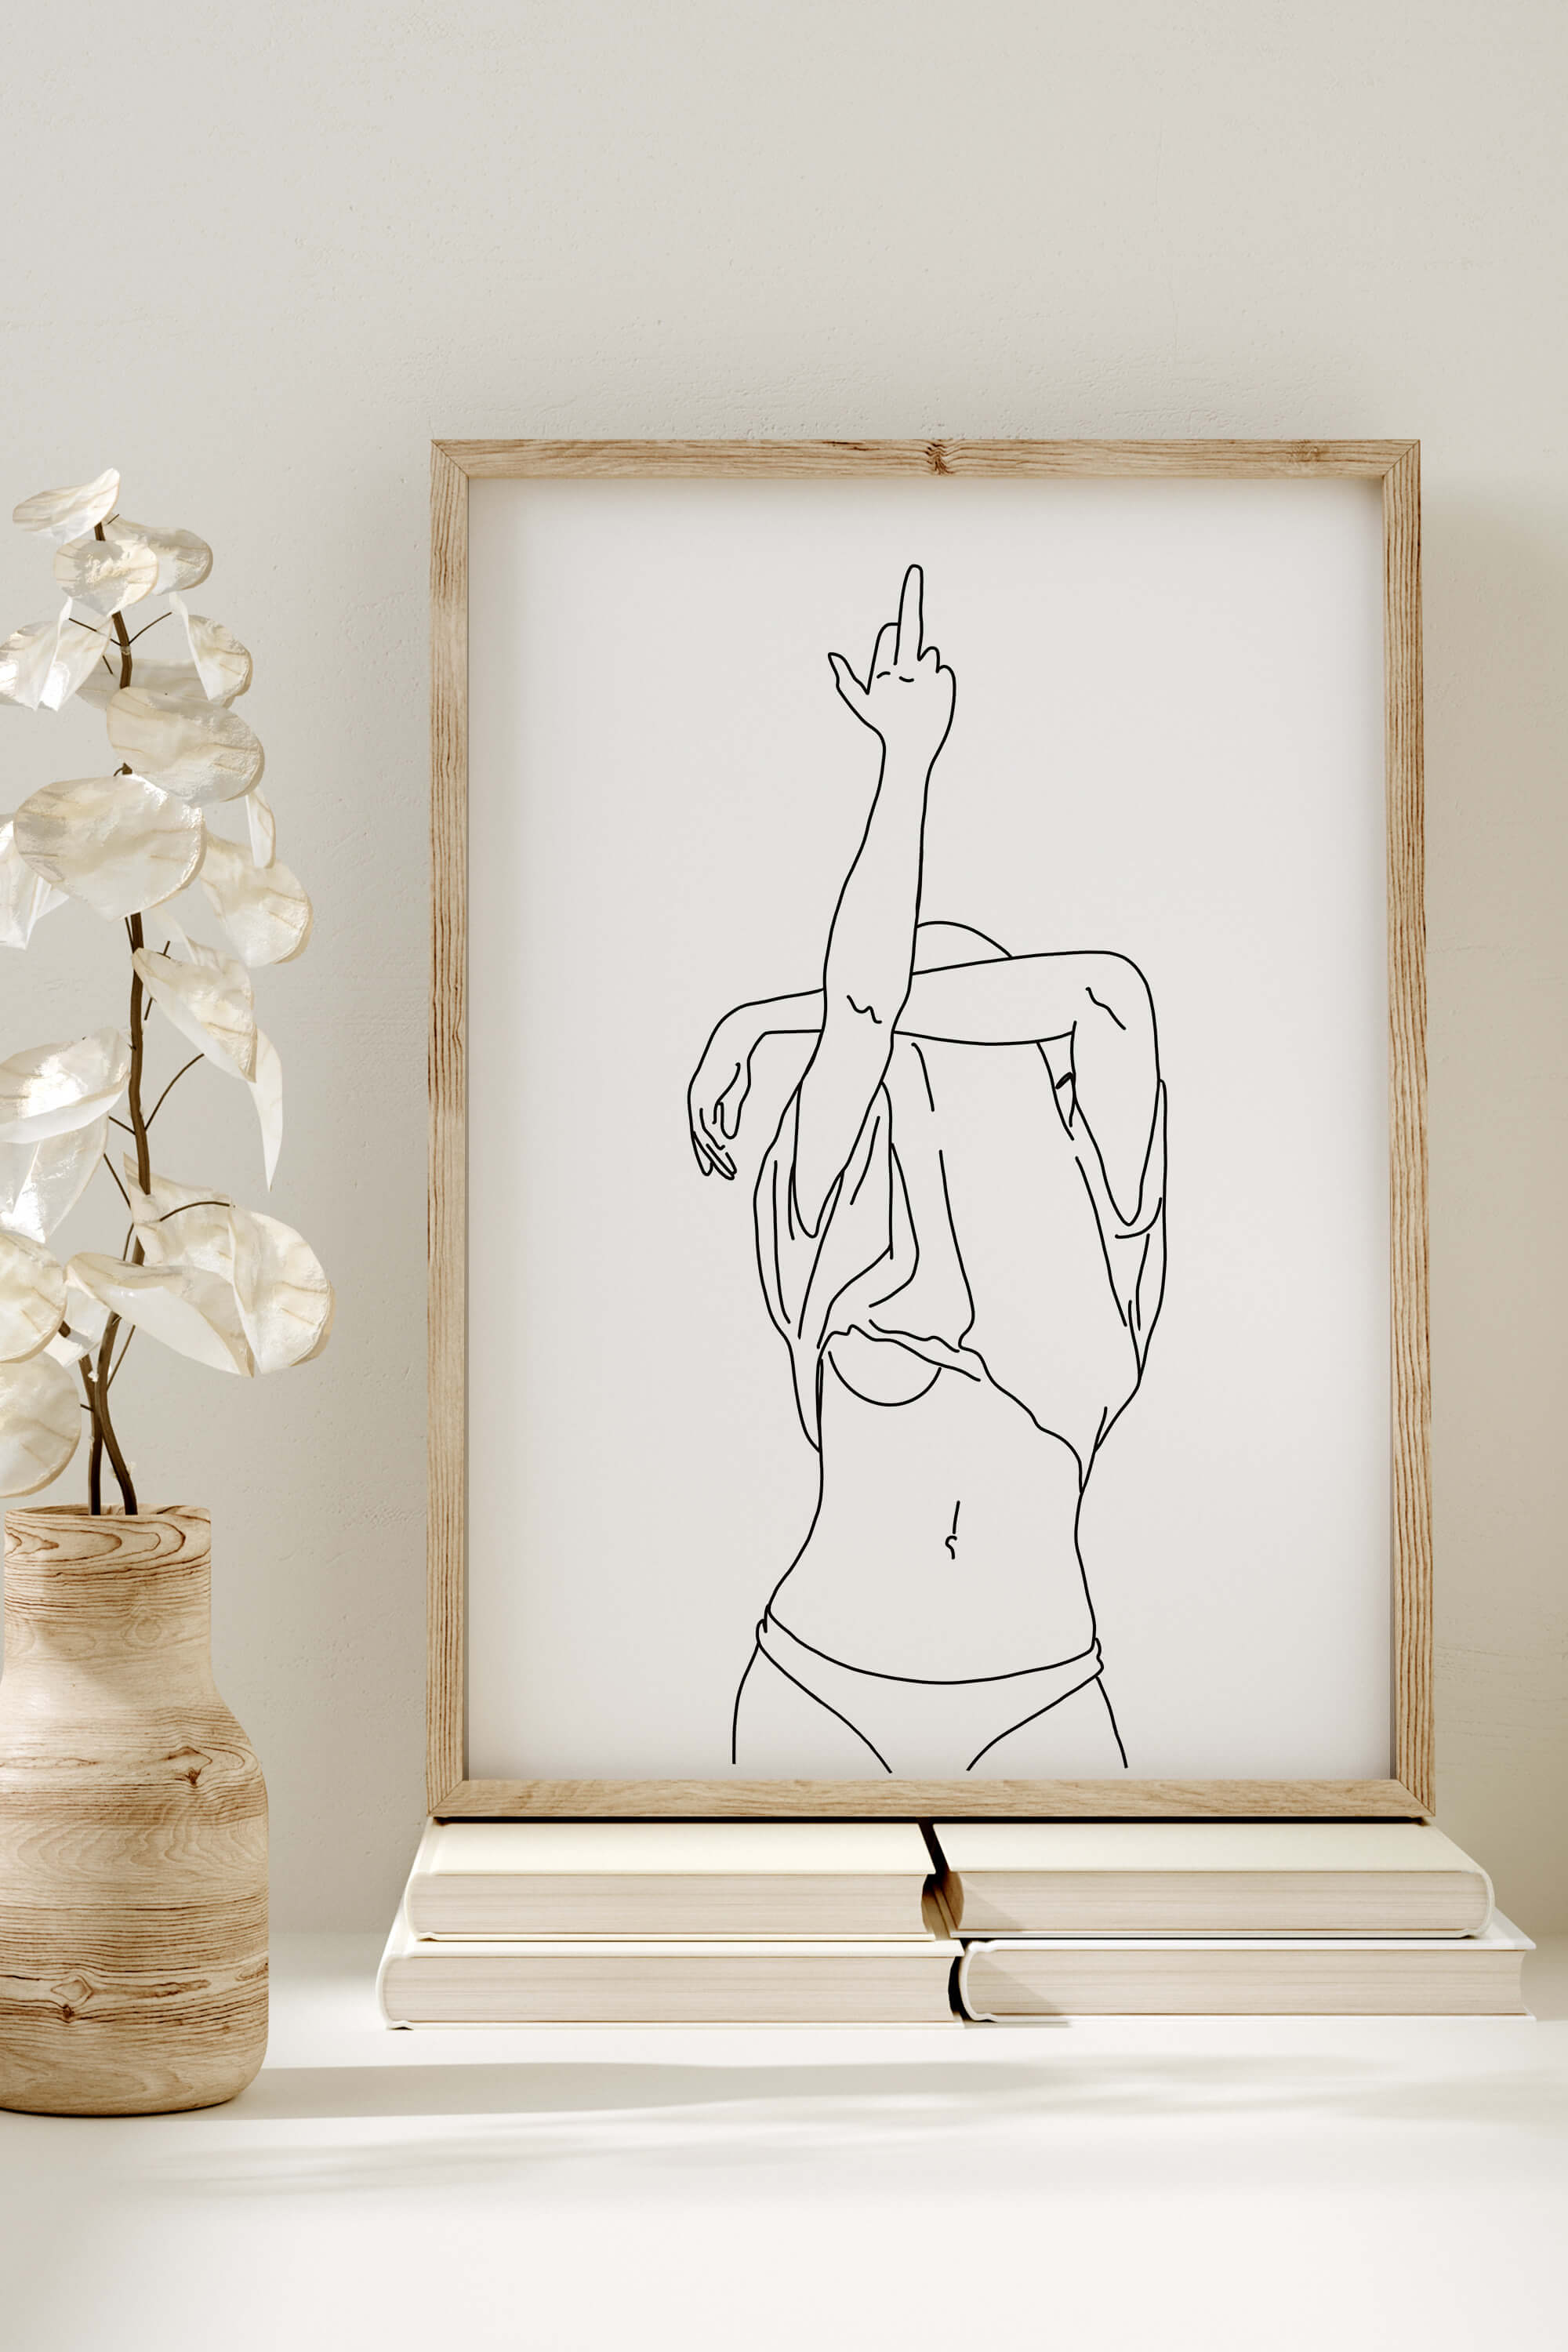 Sensual Self-Love Art: A celebration of the female form with a touch of sensuality and confidence.